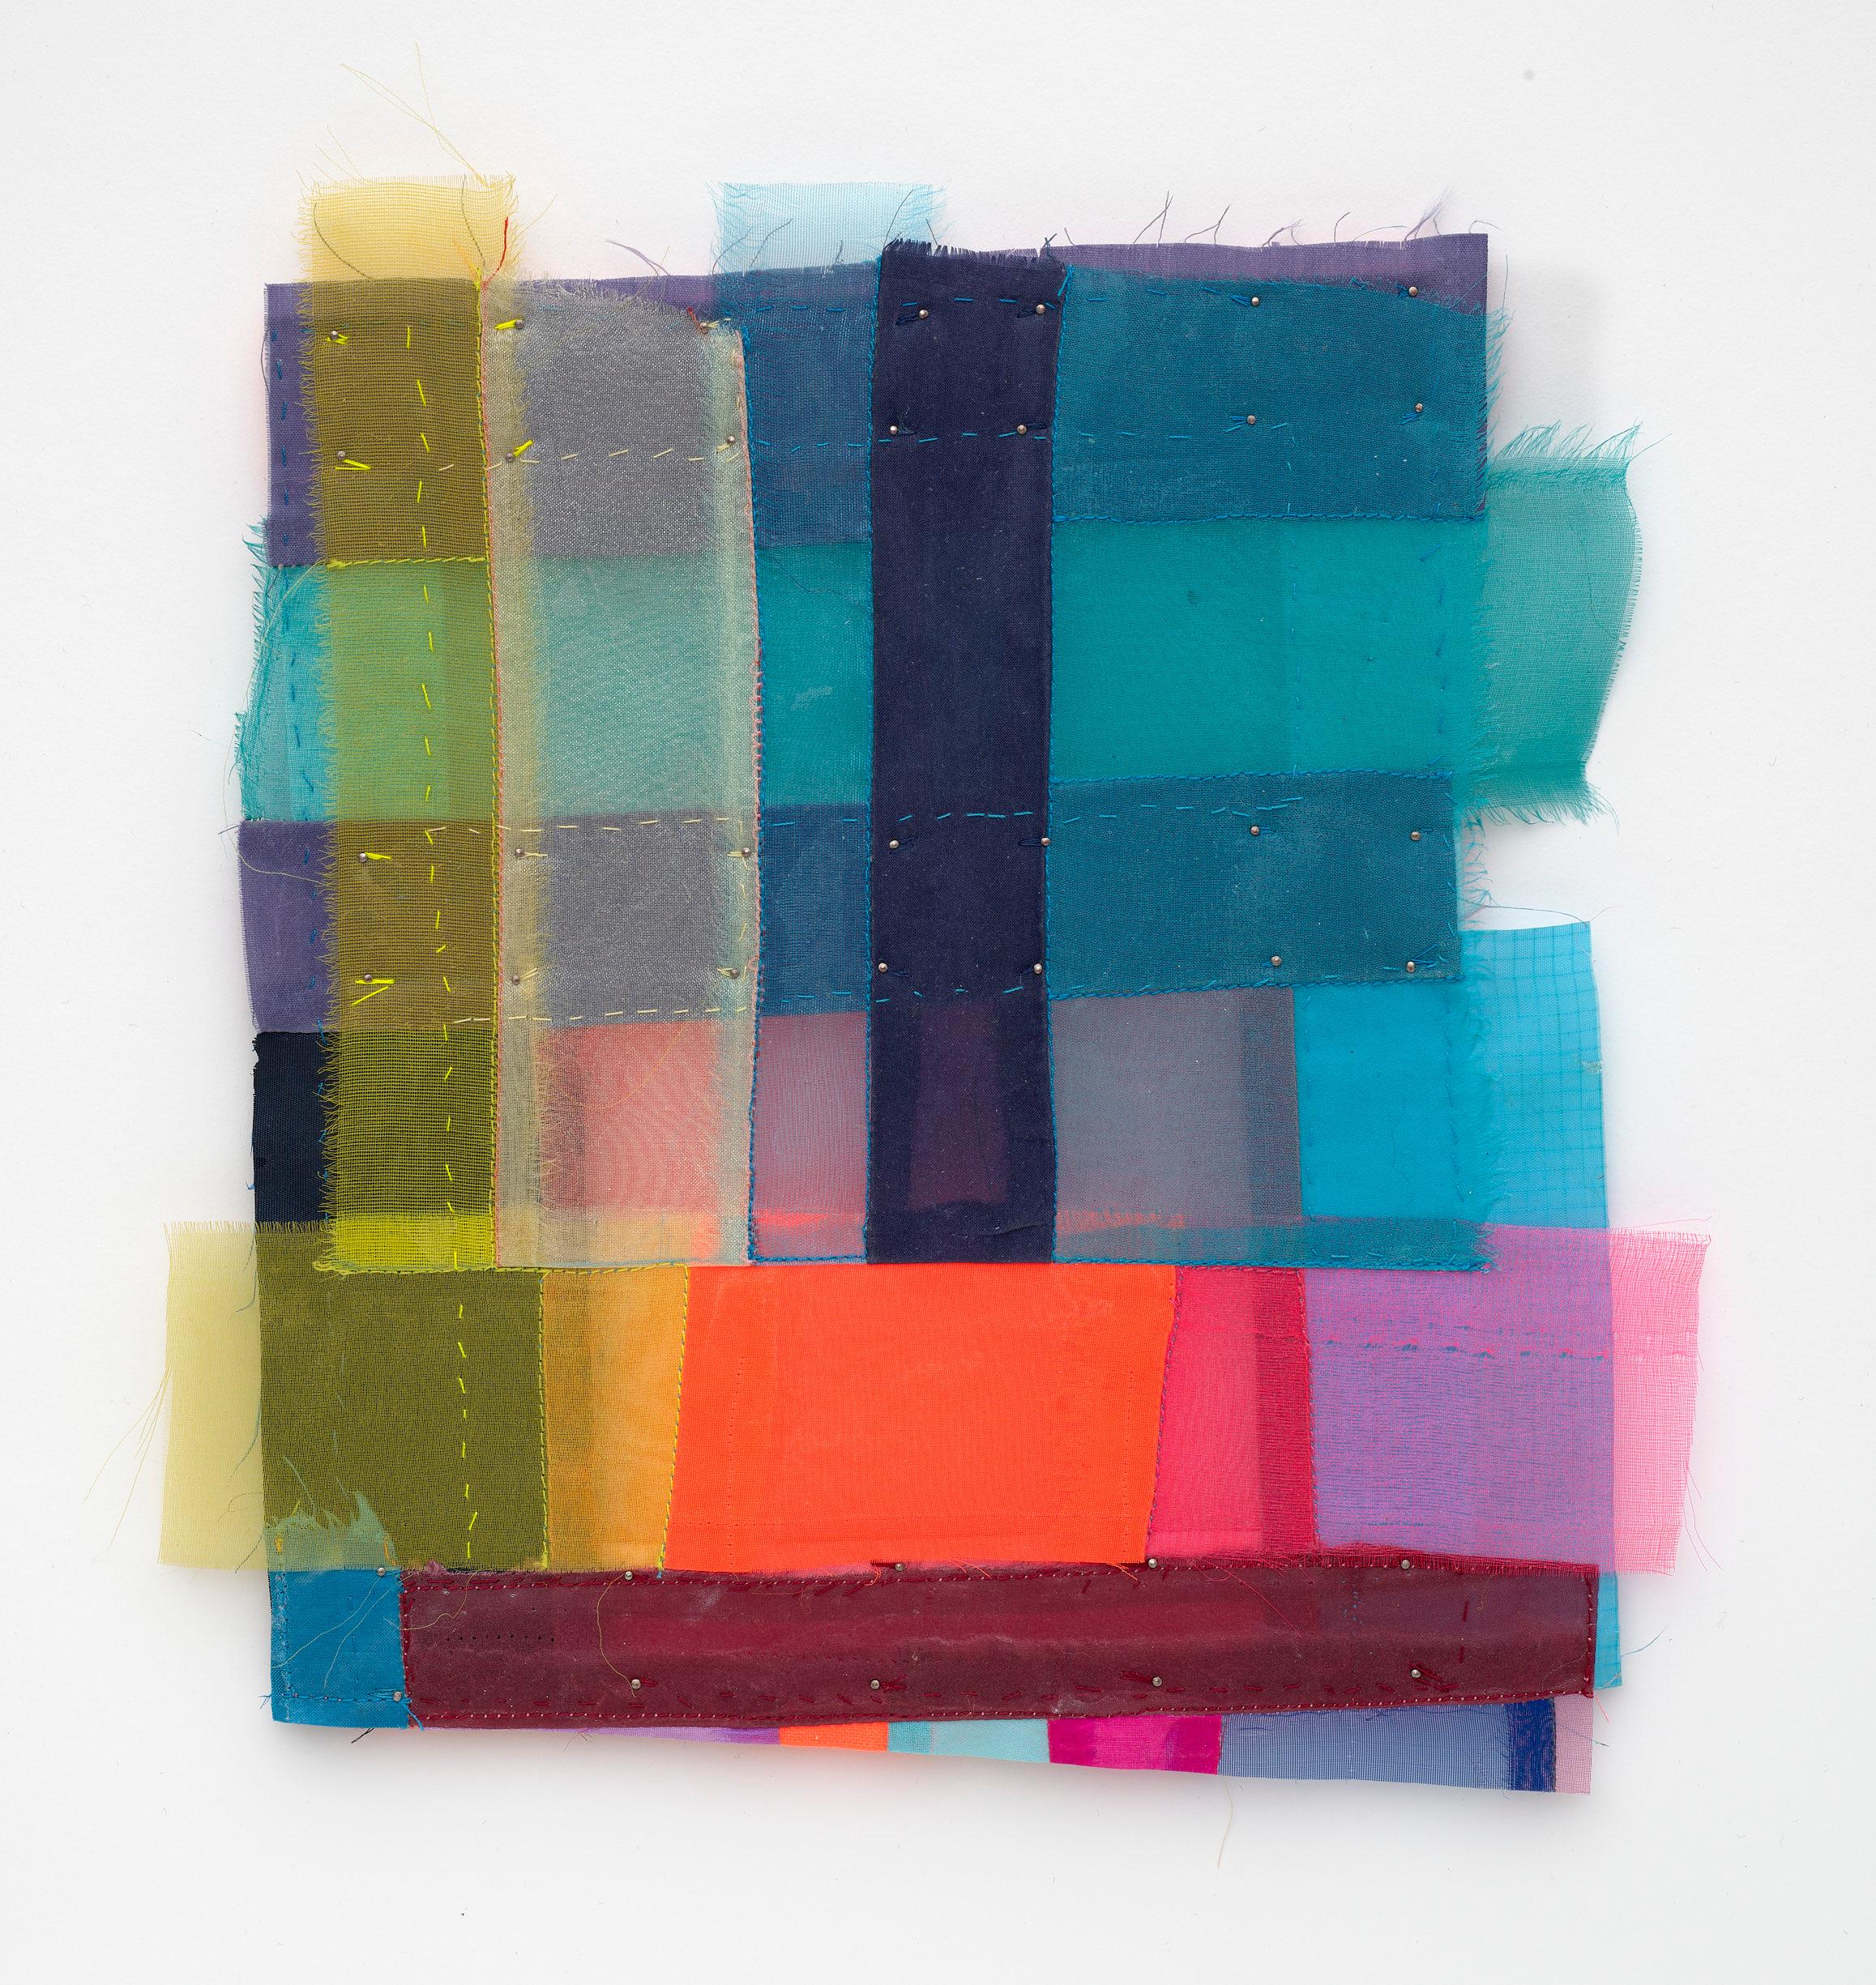 Plinth, 2023, vibrant, jewel-like, diaphanous strips of fabric collage - Mixed Media Art by Linda Schmidt